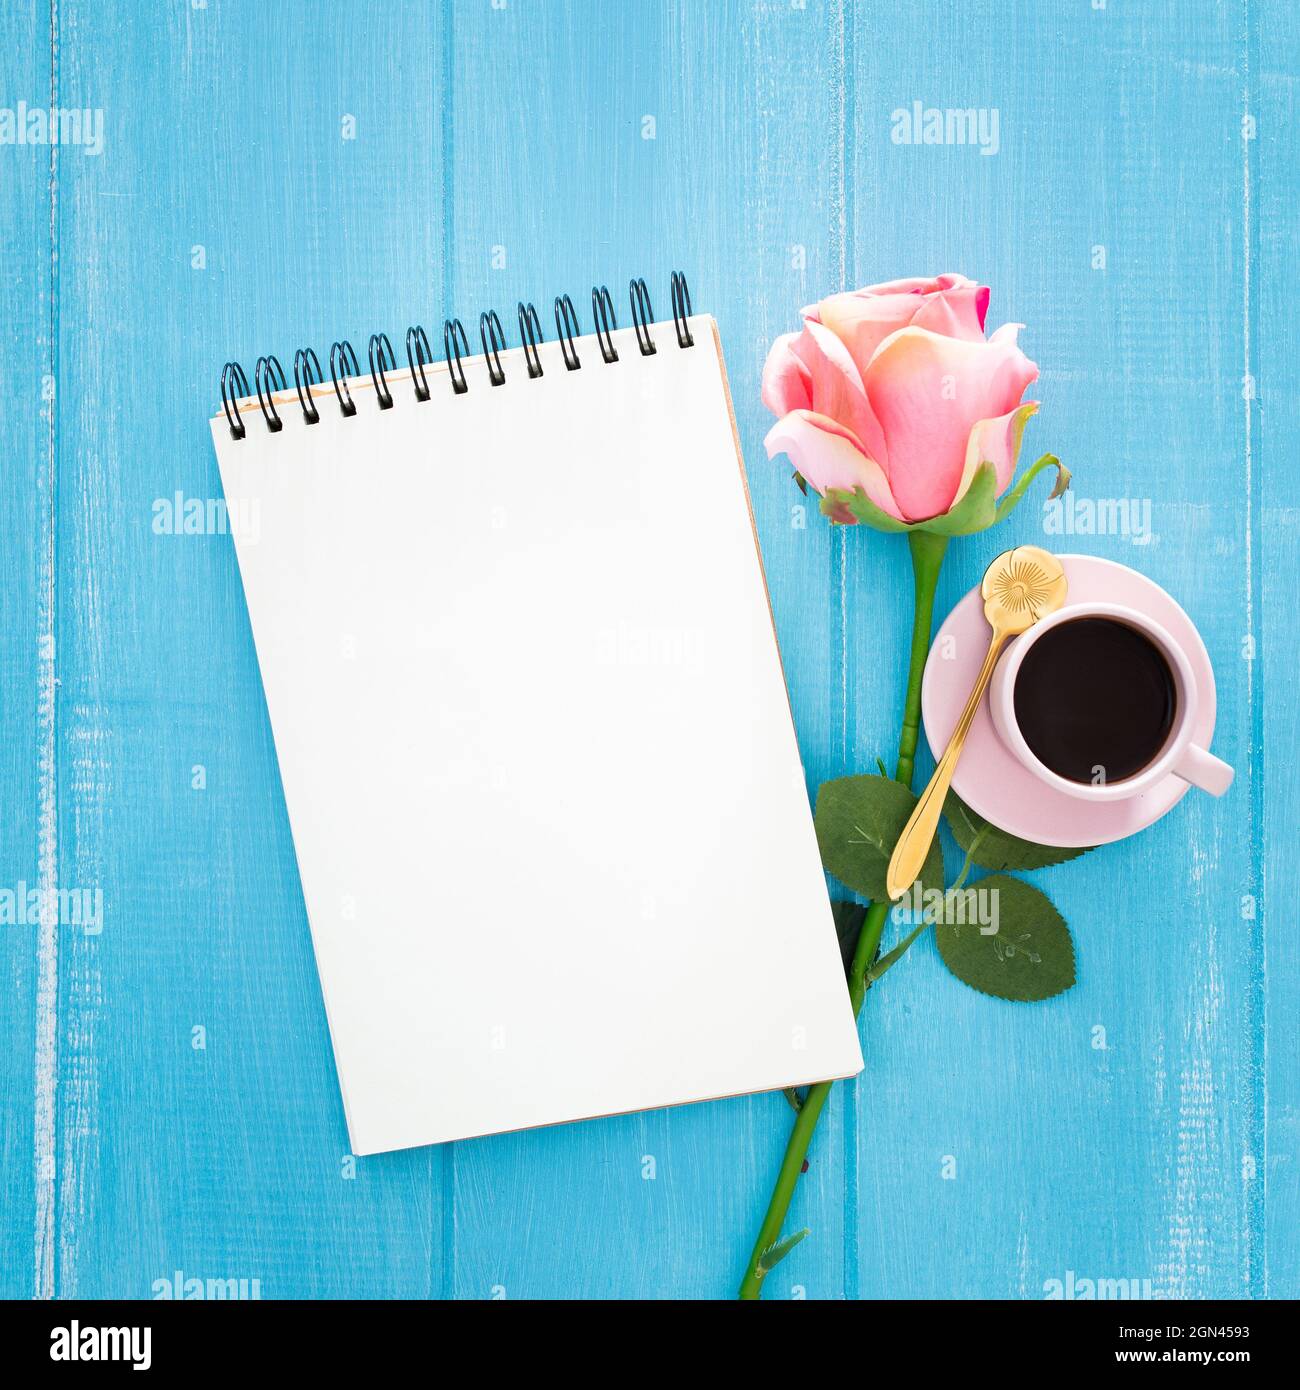 Blank notebook with space for text, a cup of coffee and a pink rose on a blue surface Stock Photo